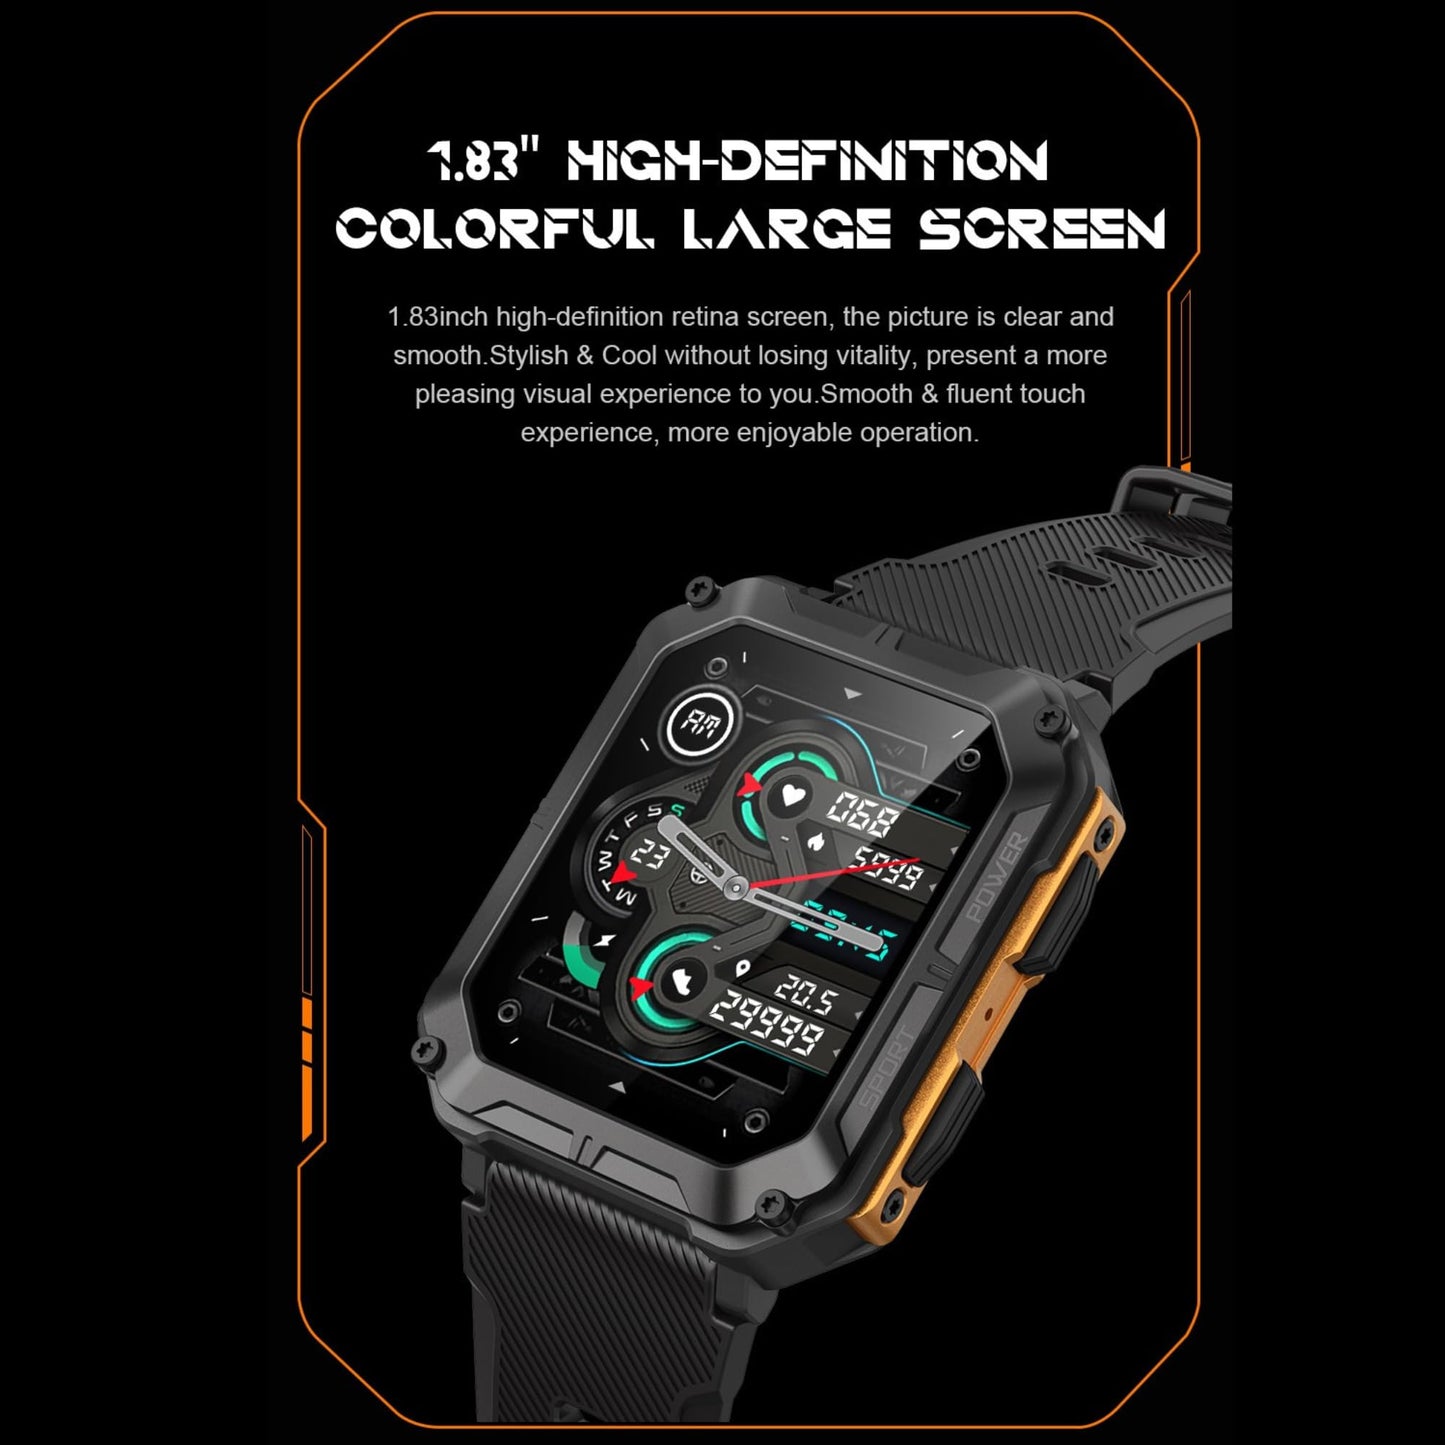 ApexArmor Tactical Timepiece 380mAh Large Capacity Battery Waterproof Android iOS Smartwatches Da fit app, Color: Black Amazon